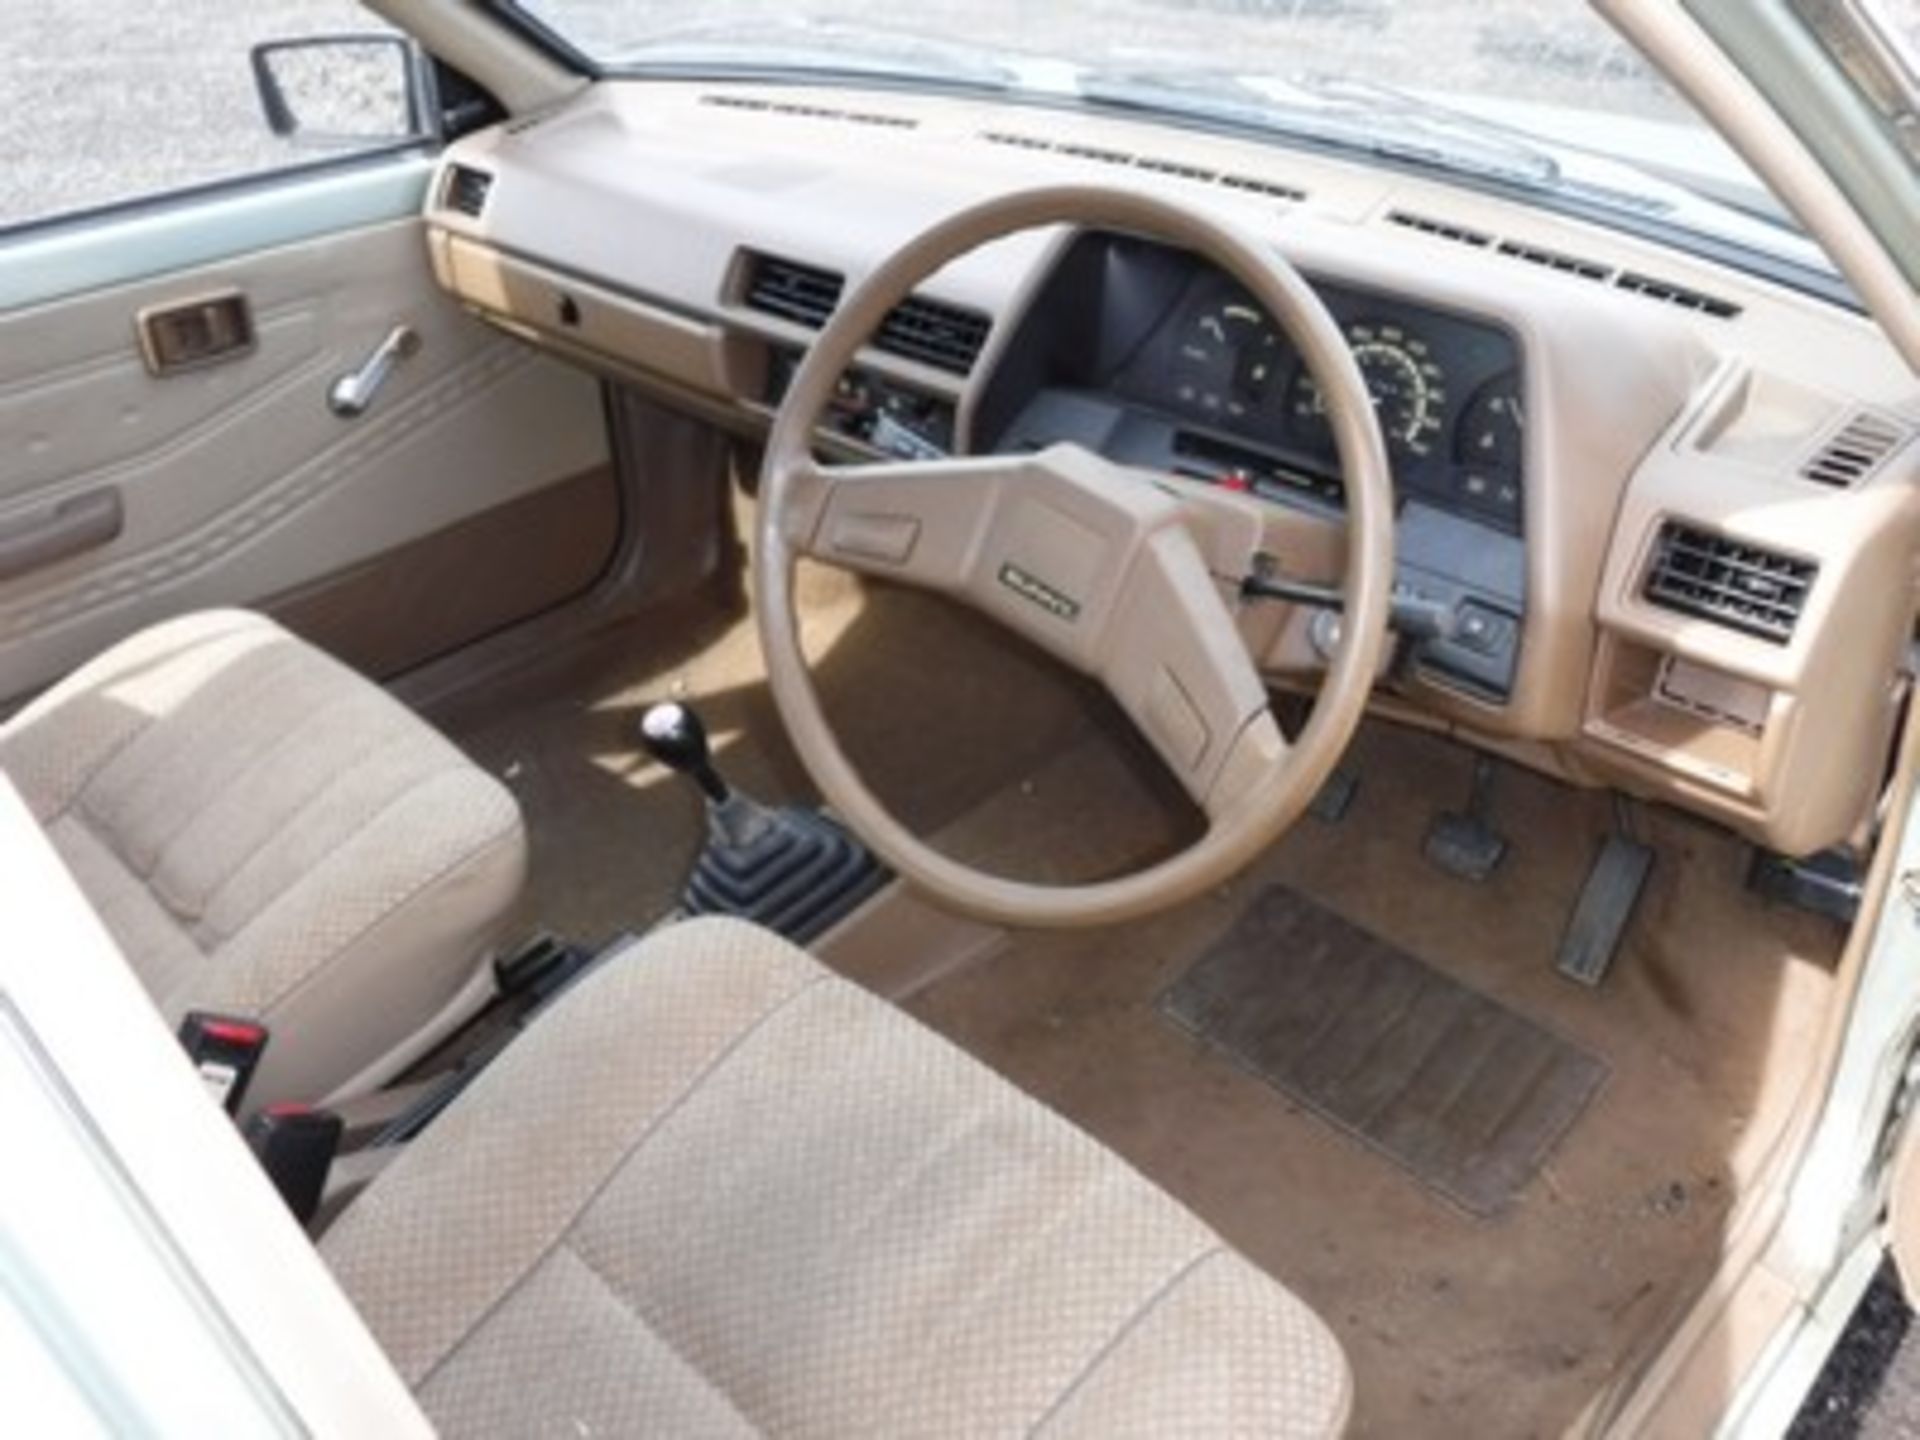 NISSAN SUNNY 1.3GS - 1270cc - Image 7 of 11